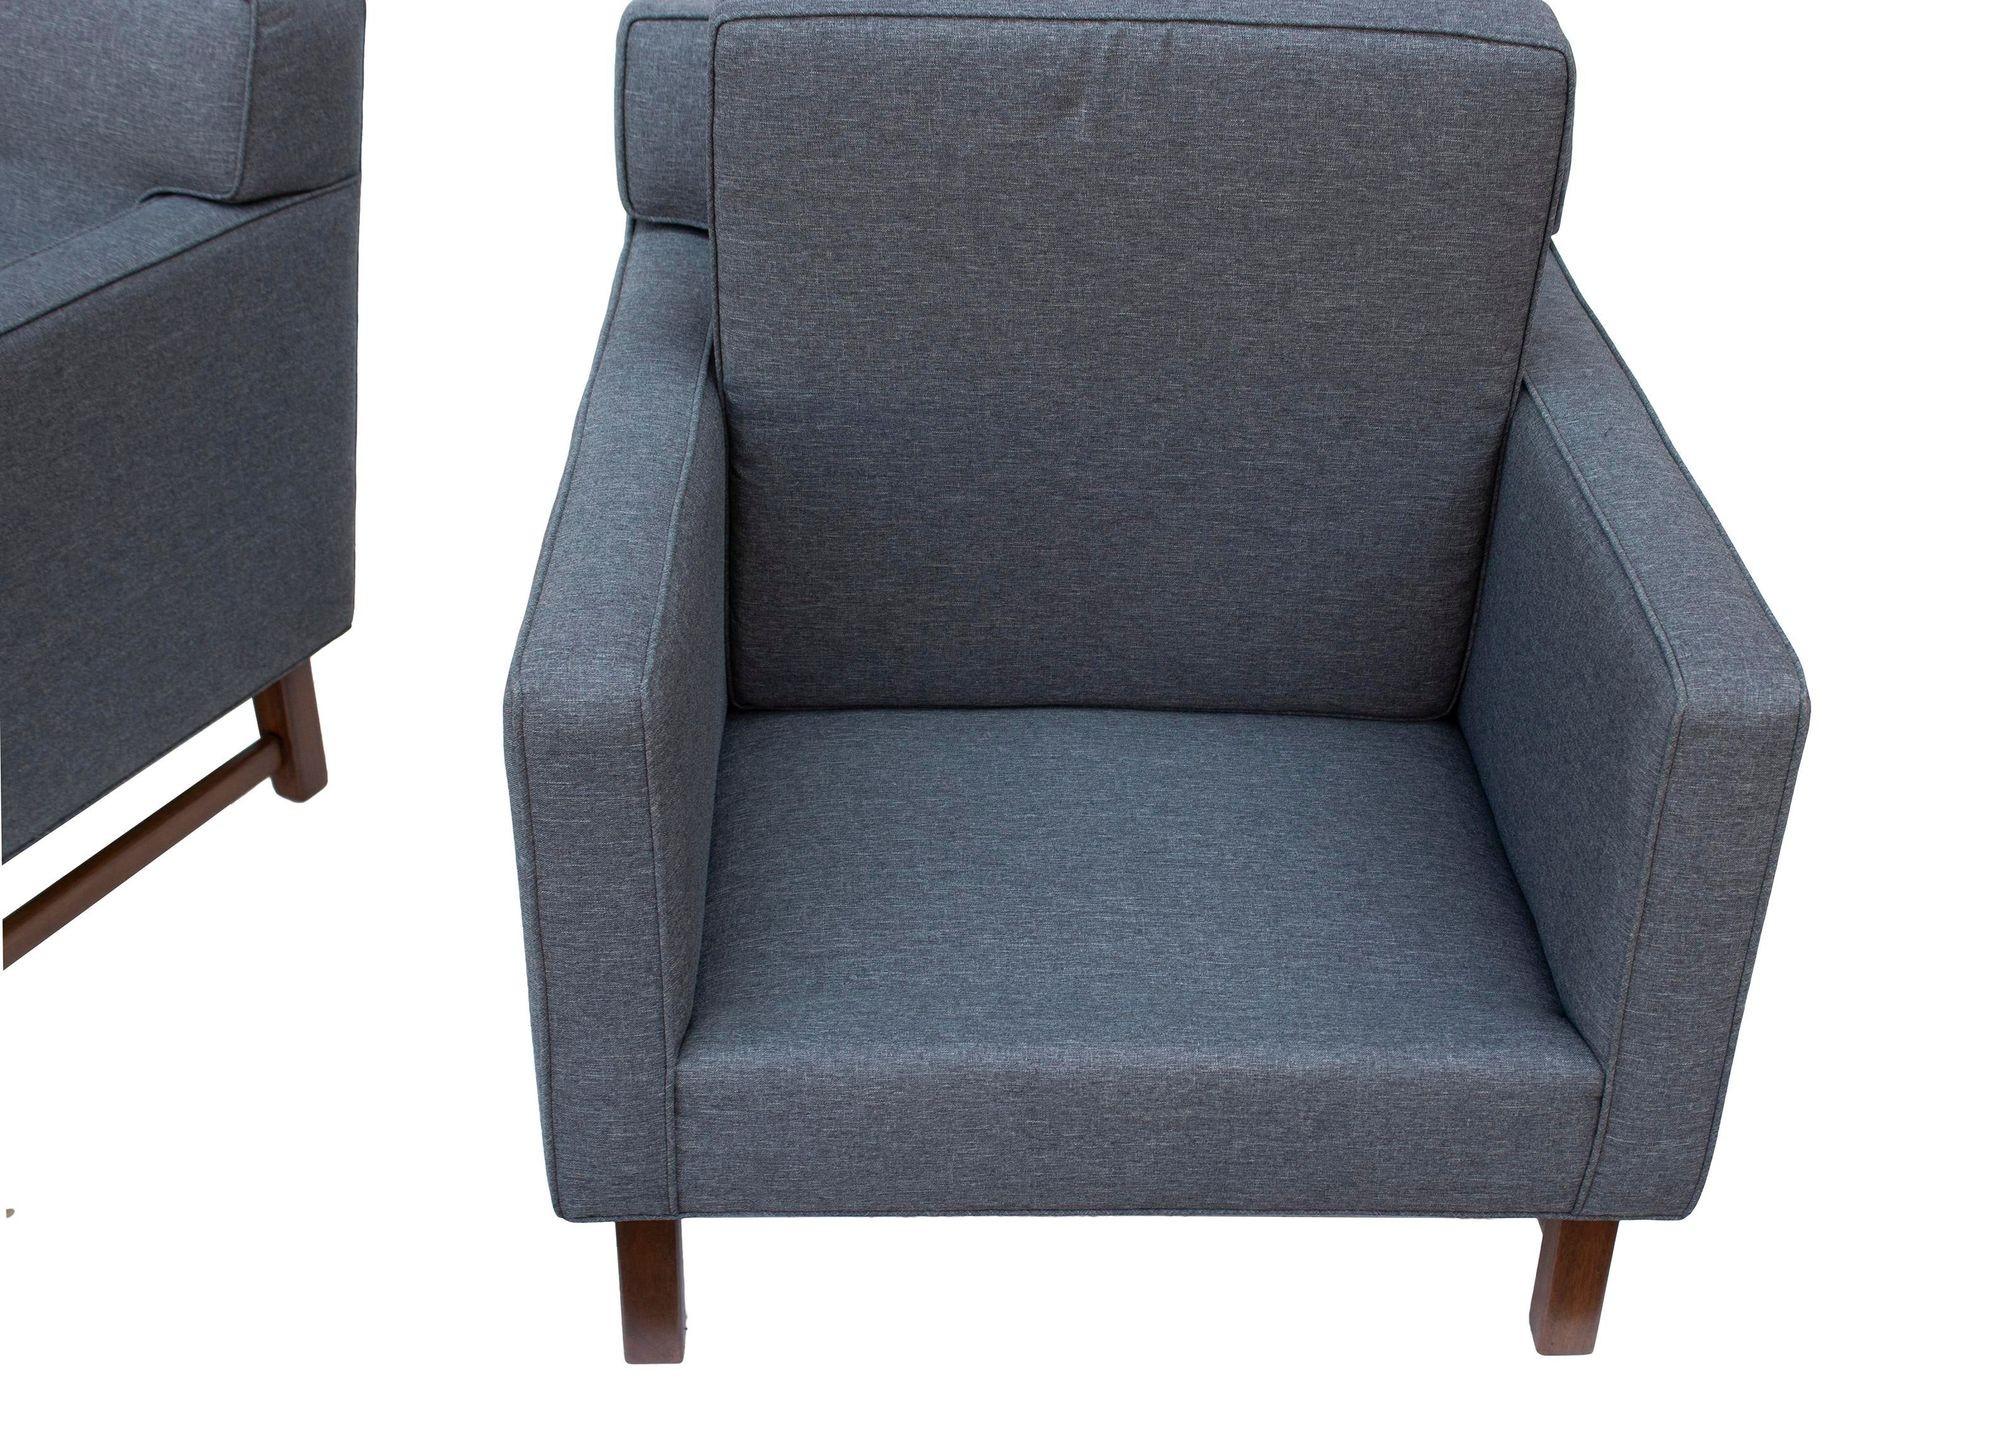 Tufted Midcentury Armchairs in the Style of Dunbar, a Pair For Sale 4